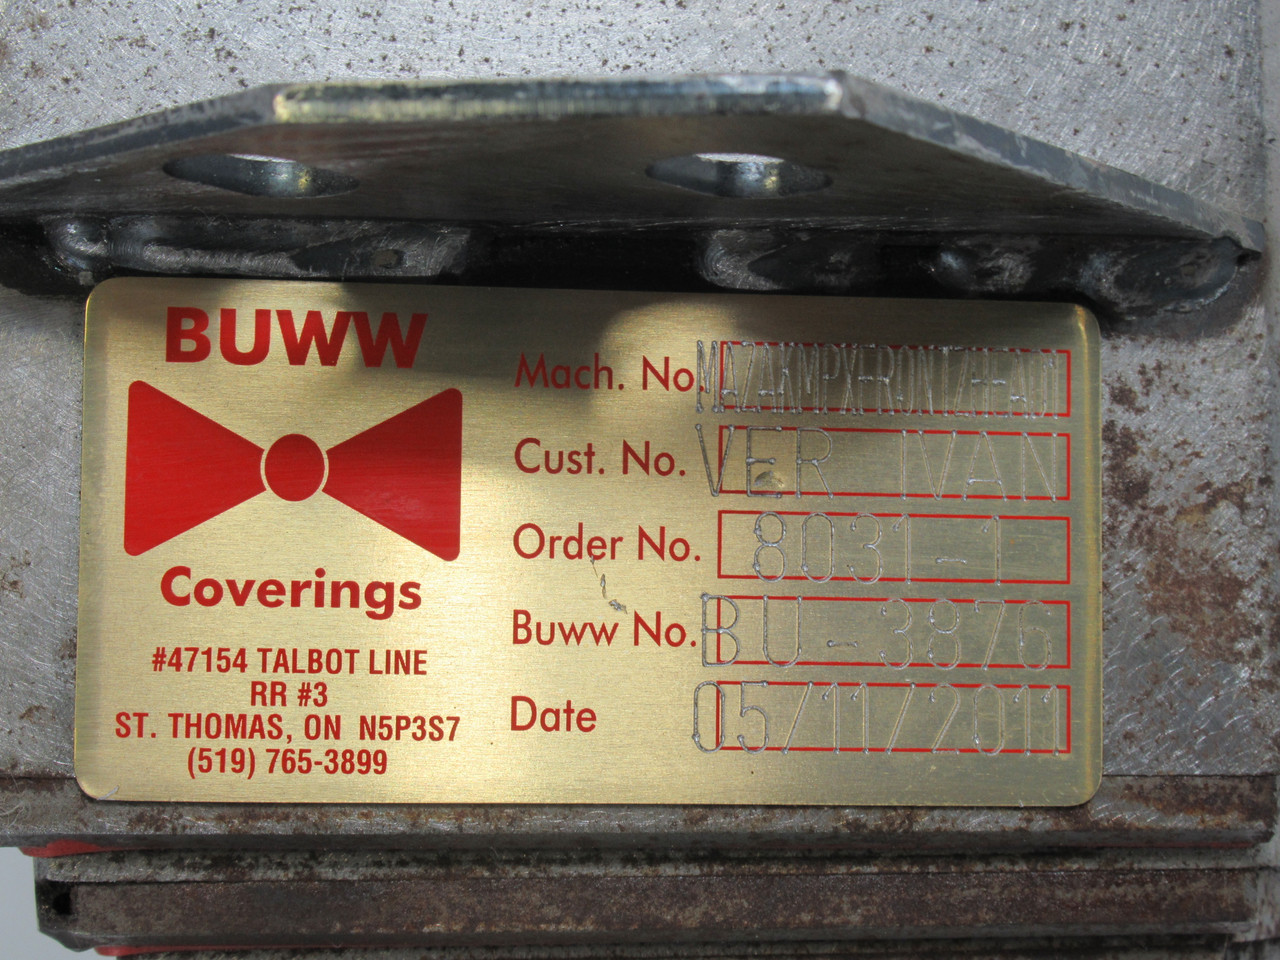 Buww Coverings BU-3876 Way Cover USED